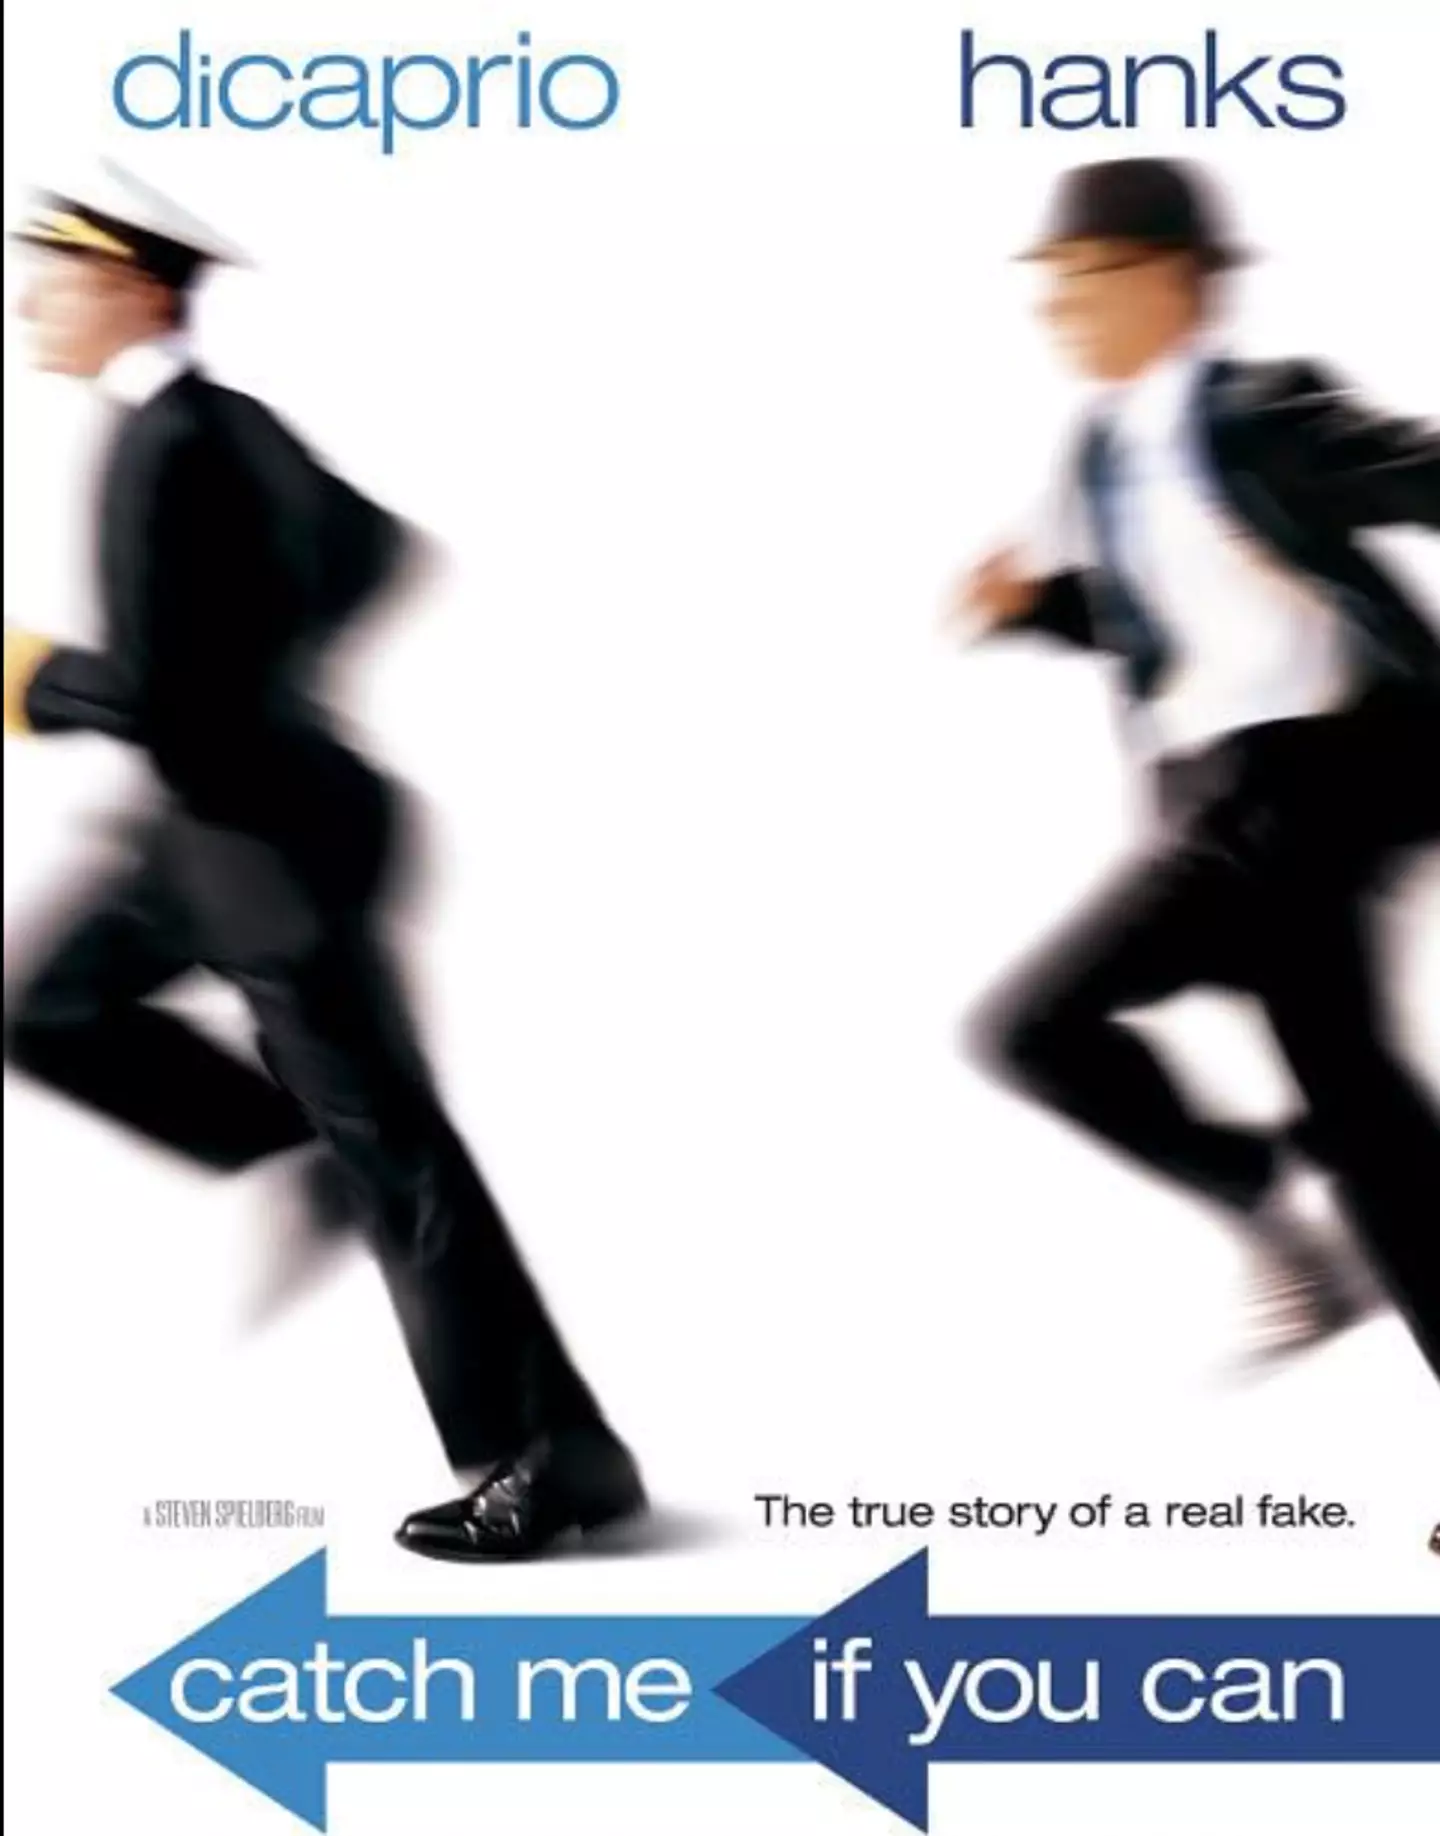 2002 crime drama Catch Me If You Can commands a score of 96 percent on Rotten Tomatoes.